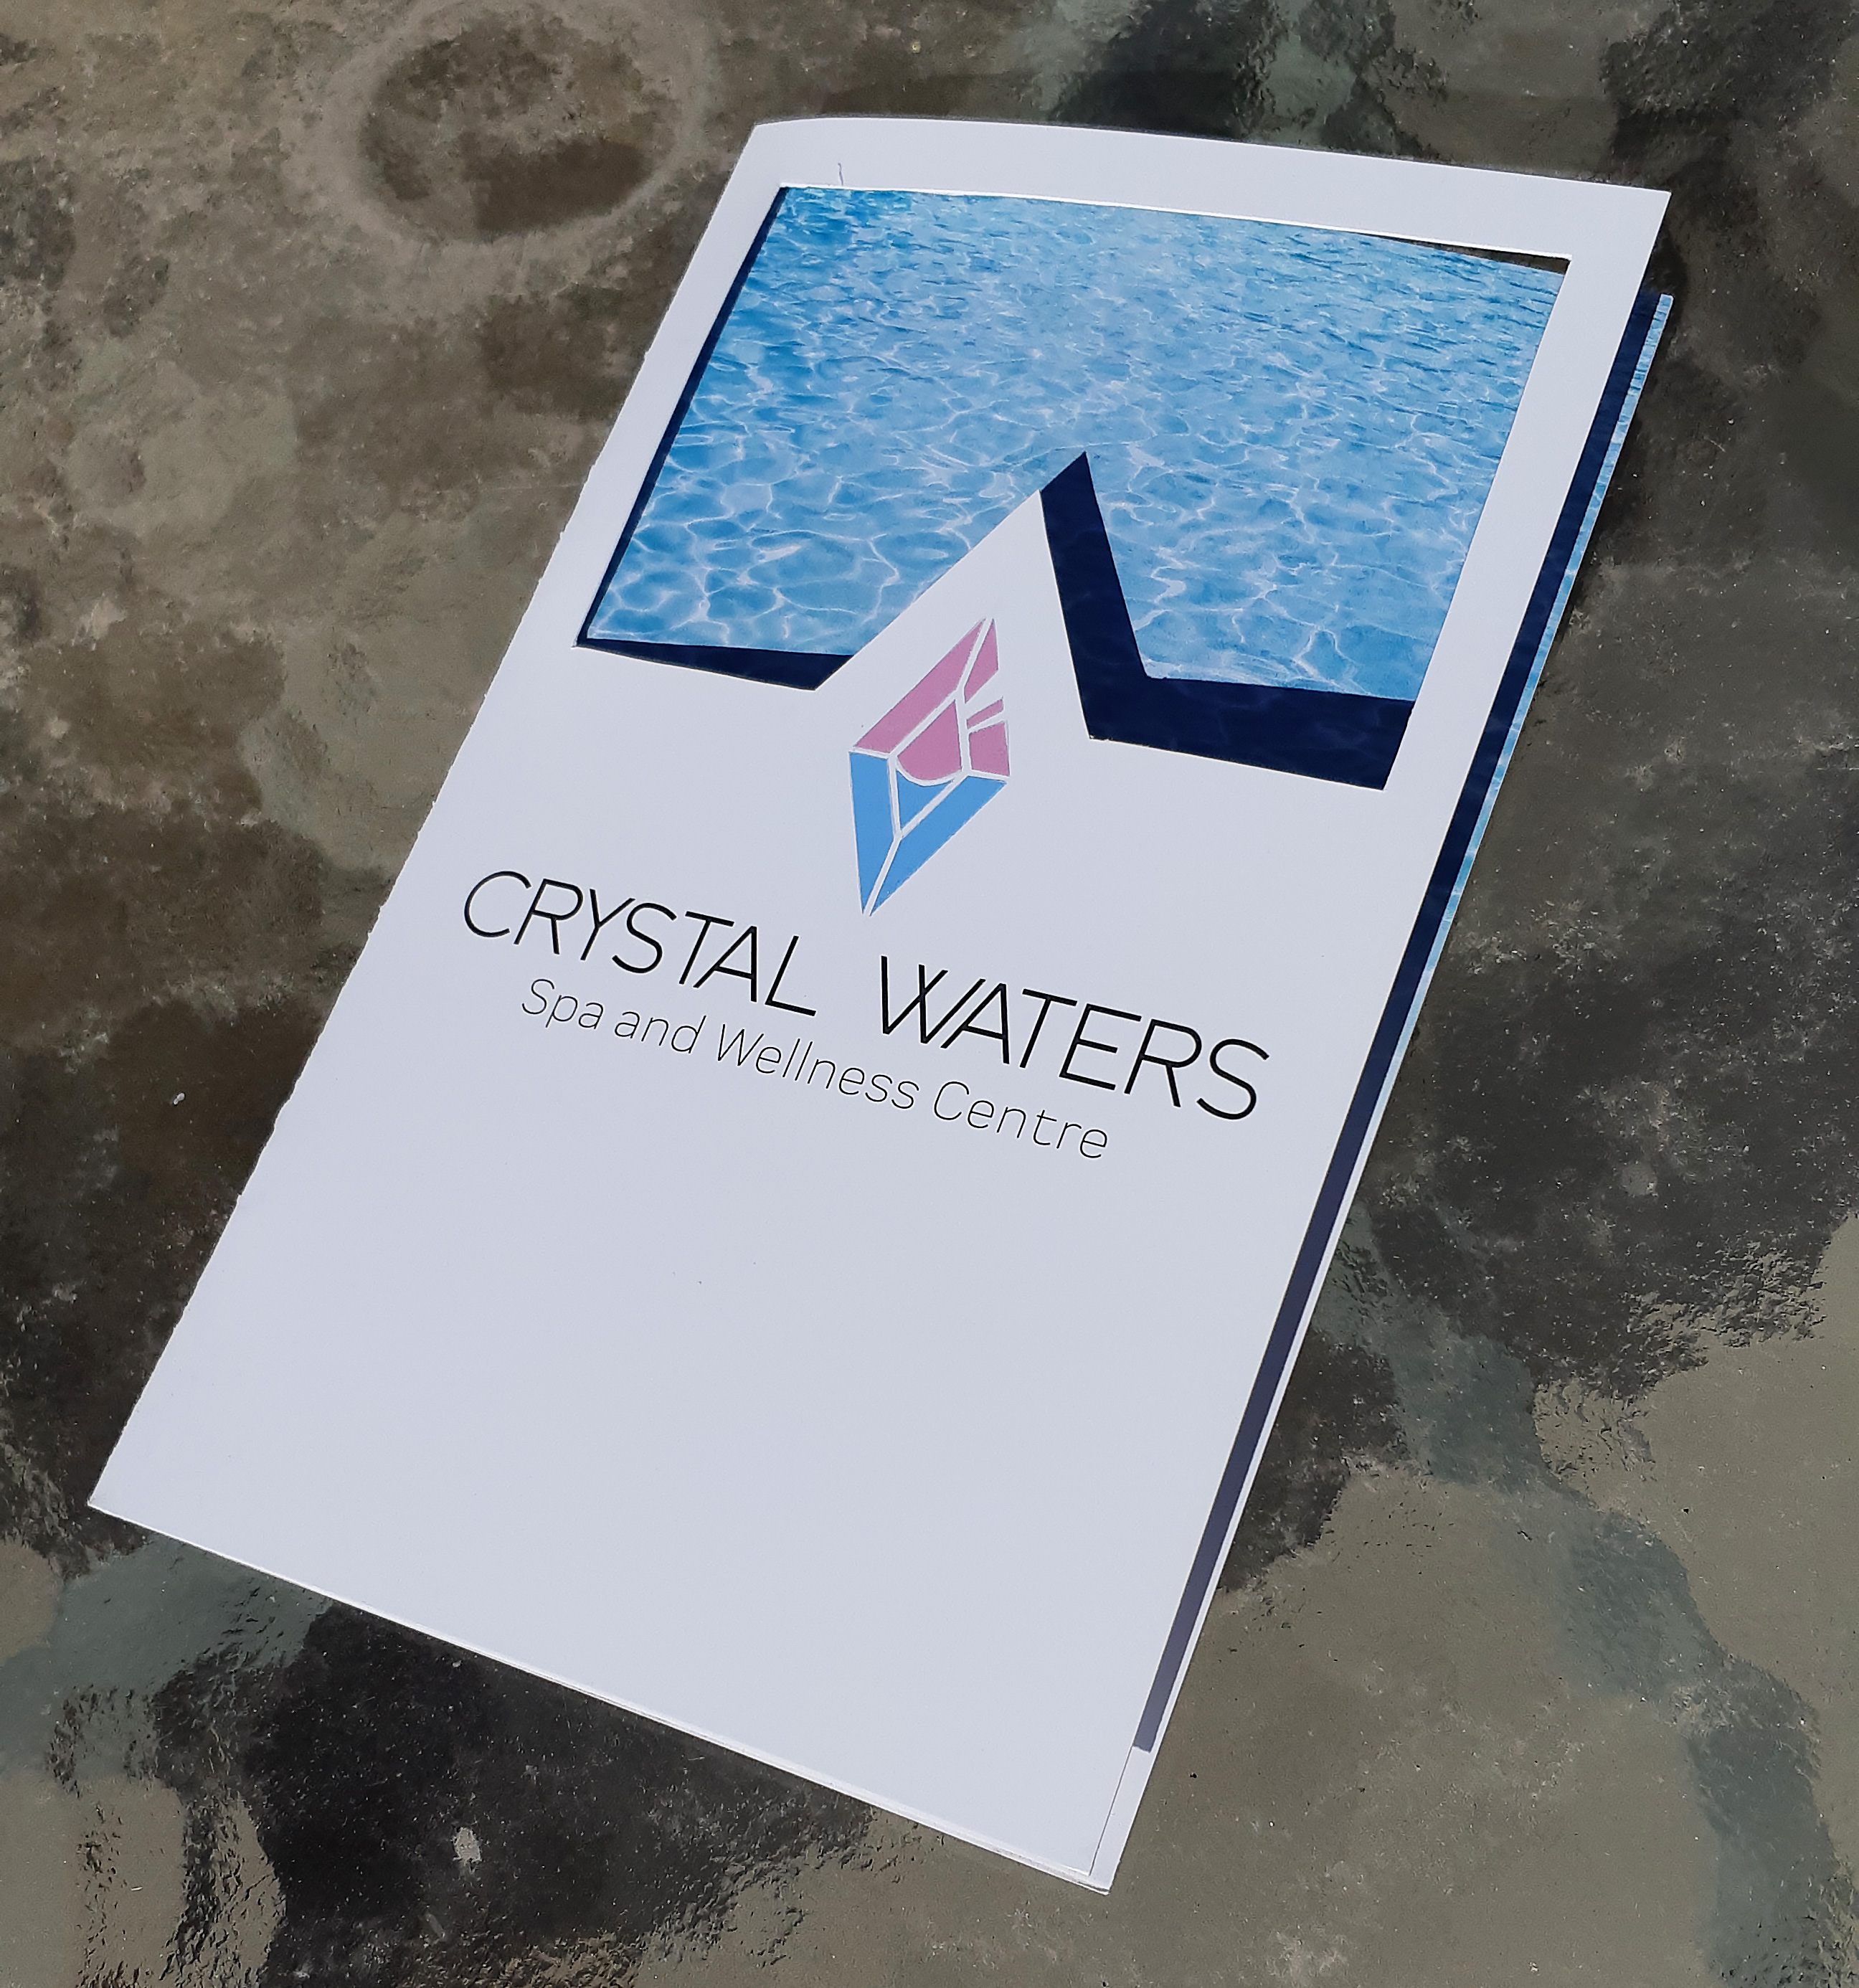 The front cover of the Crystal Waters Spa brochure